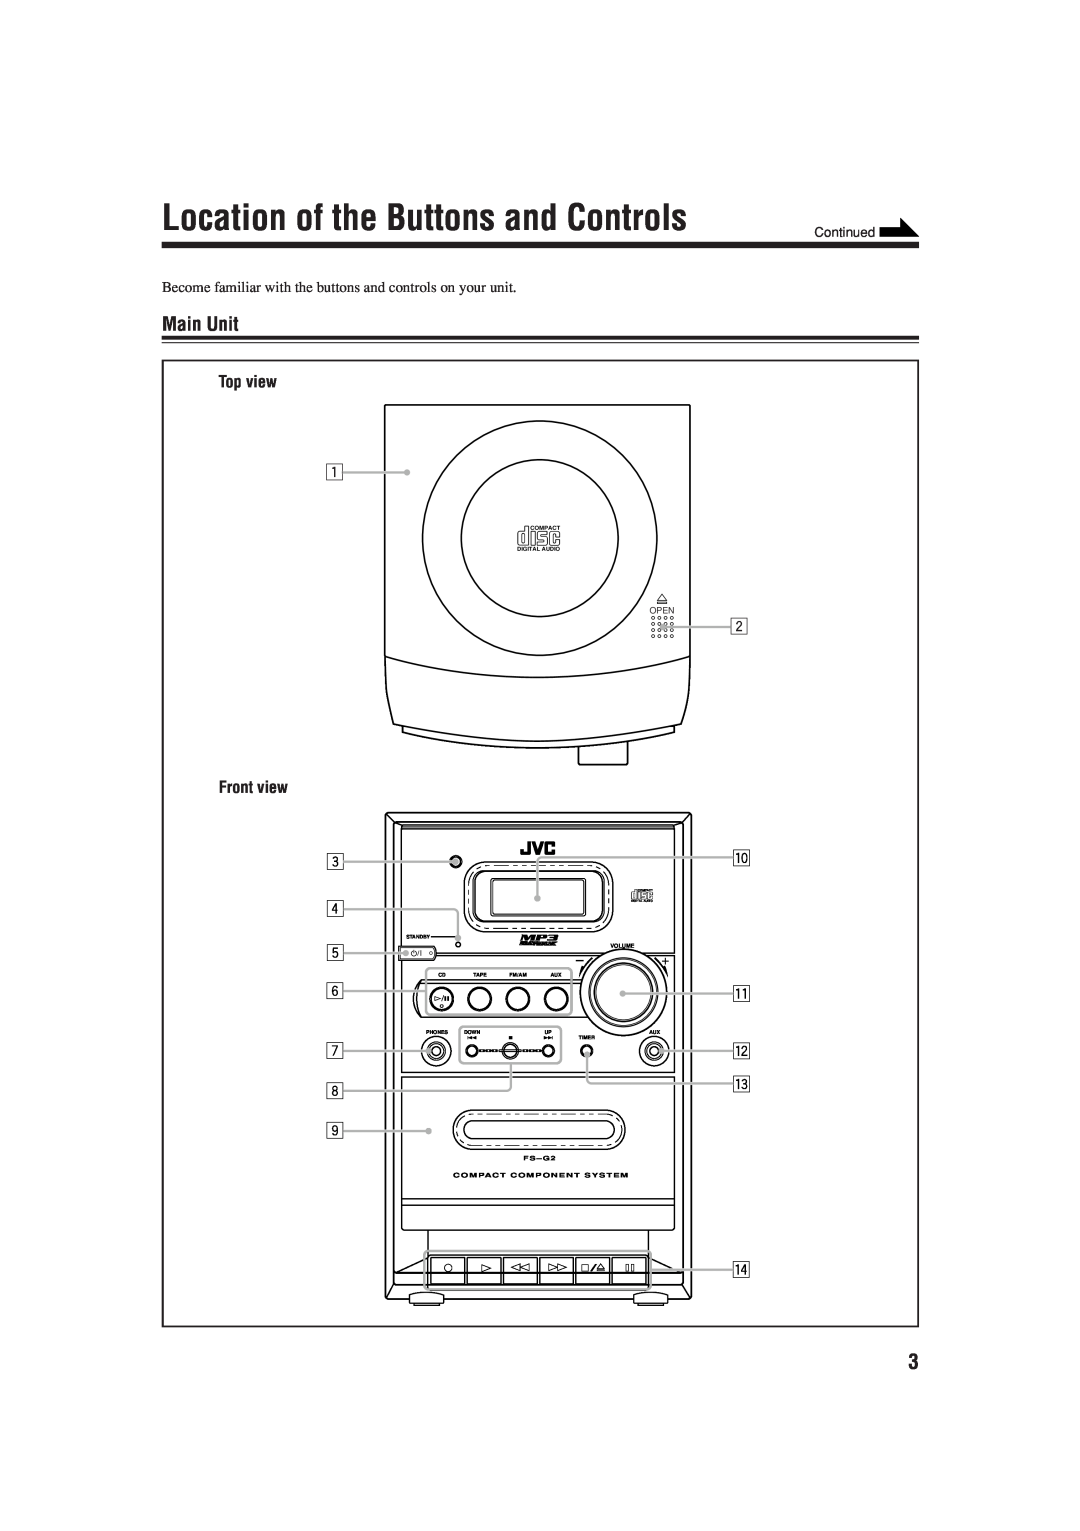 JVC FS-G2 Location of the Buttons and Controls, Main Unit, p q w e, Top view, Front view, Open, Compact Component System 